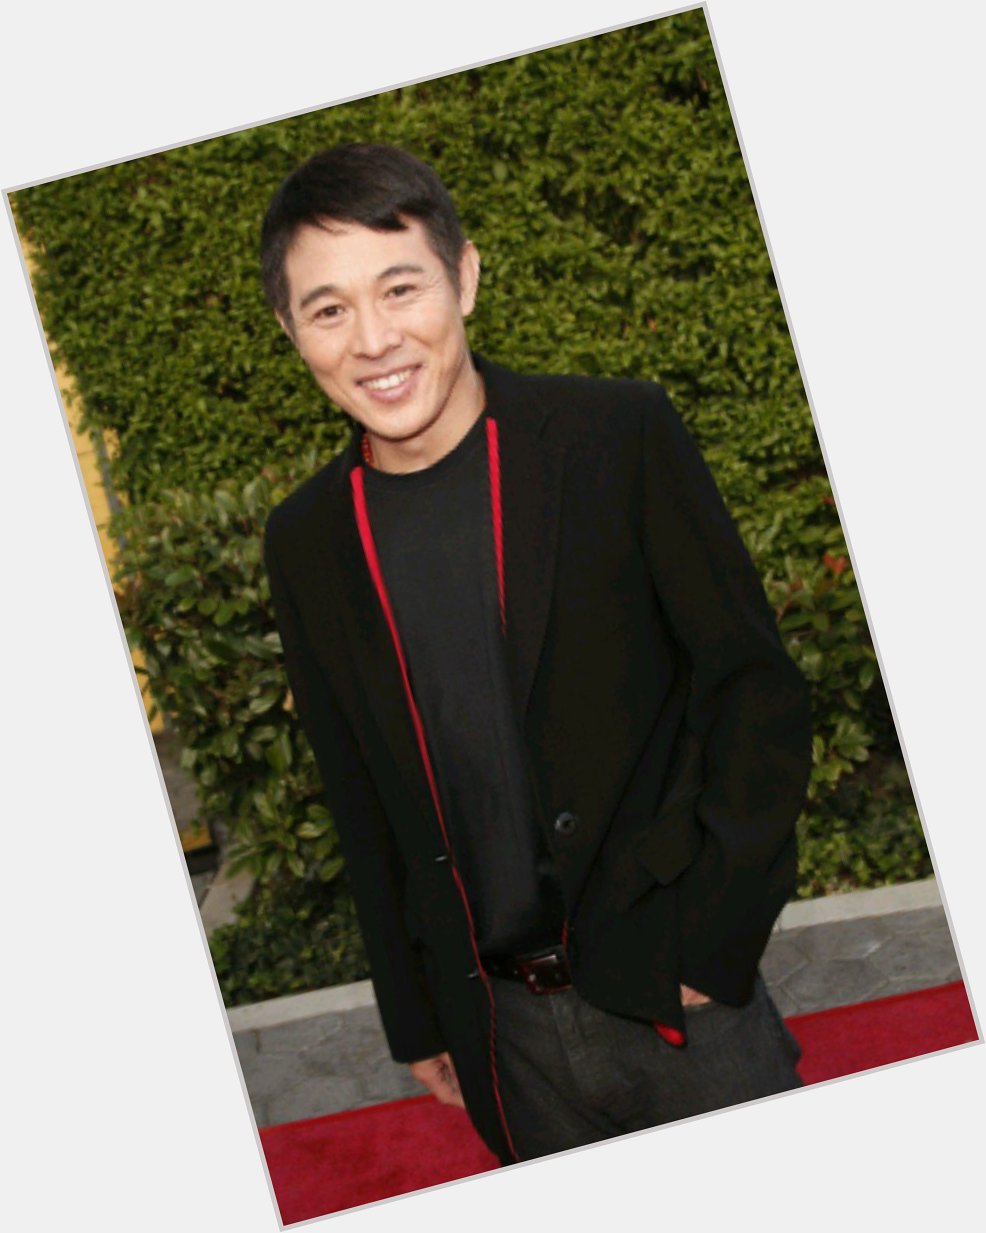 Happy birthday Jet Li hope you have a good day. Love from a fan in the UK. 